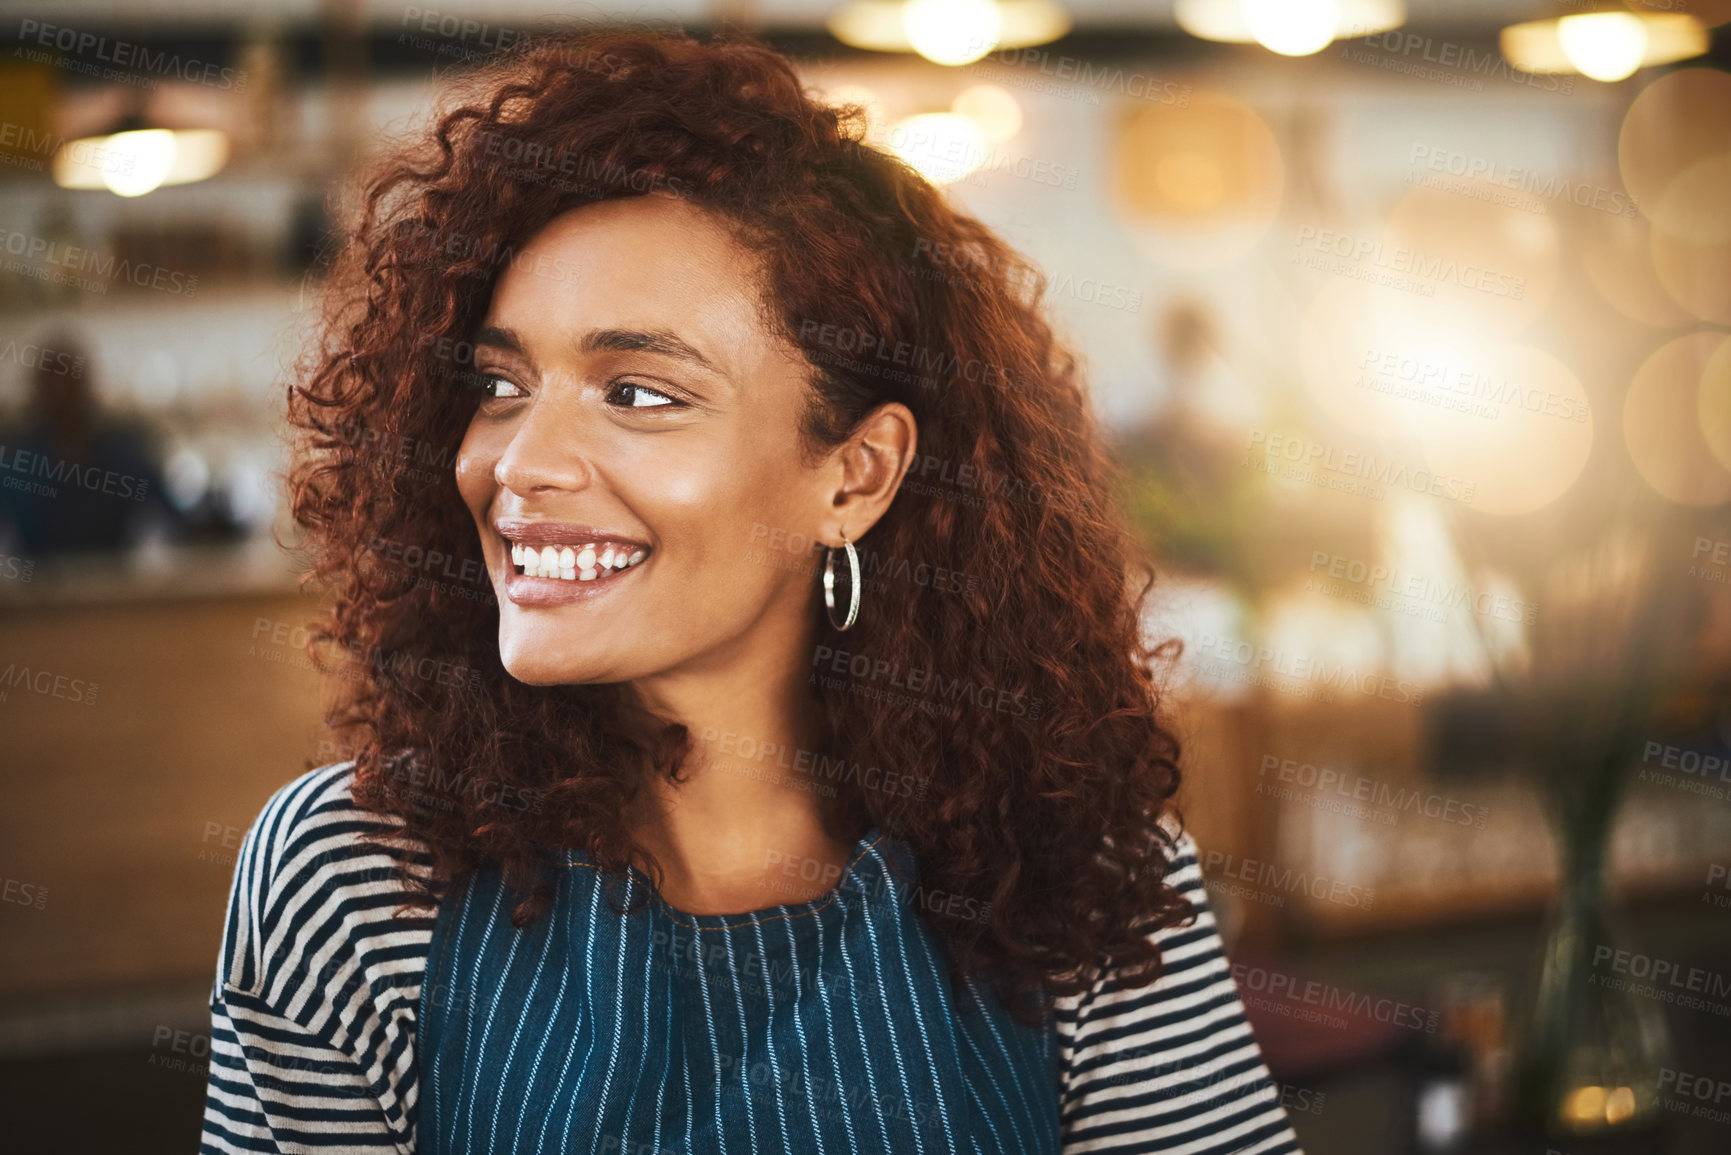 Buy stock photo Cropped shot of an attractive young woman standing in her coffee shop